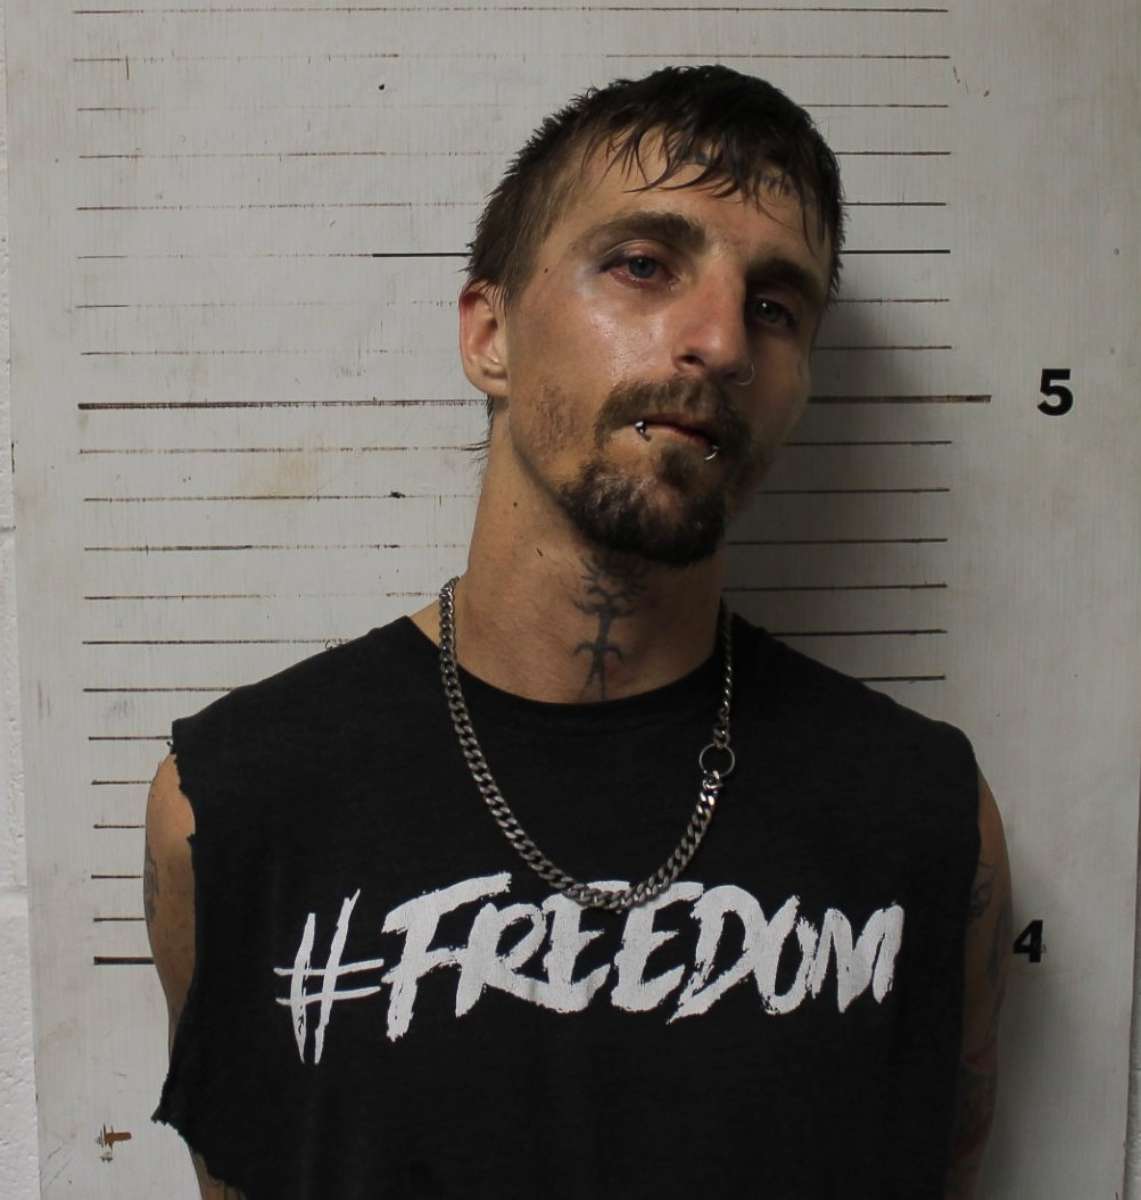 PHOTO: Bryan Francis was arrested and charged with distribution of a controlled substance within 2,000 feet of a school as well as possession of a controlled substance after a bag of methamphetamine ended up in a customer's order in Skiatook, Oklahoma.